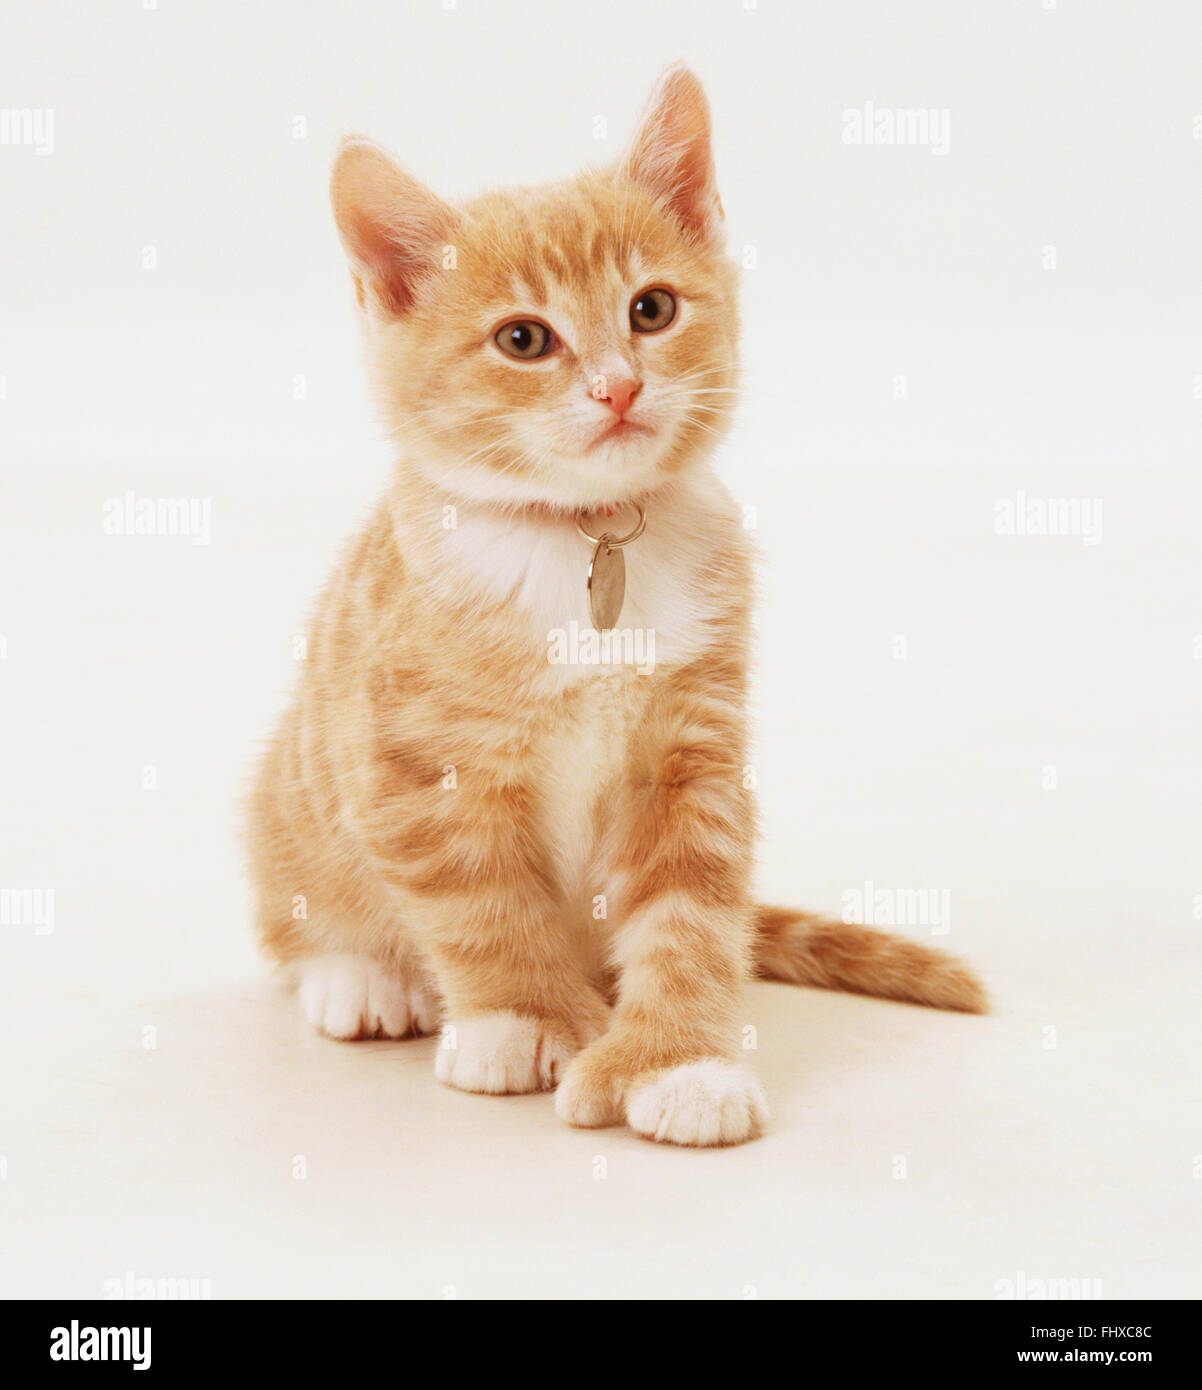 Sitting light brown and white tabby kitten (Felis catus) with a tag around its neck, front view Stock Photo